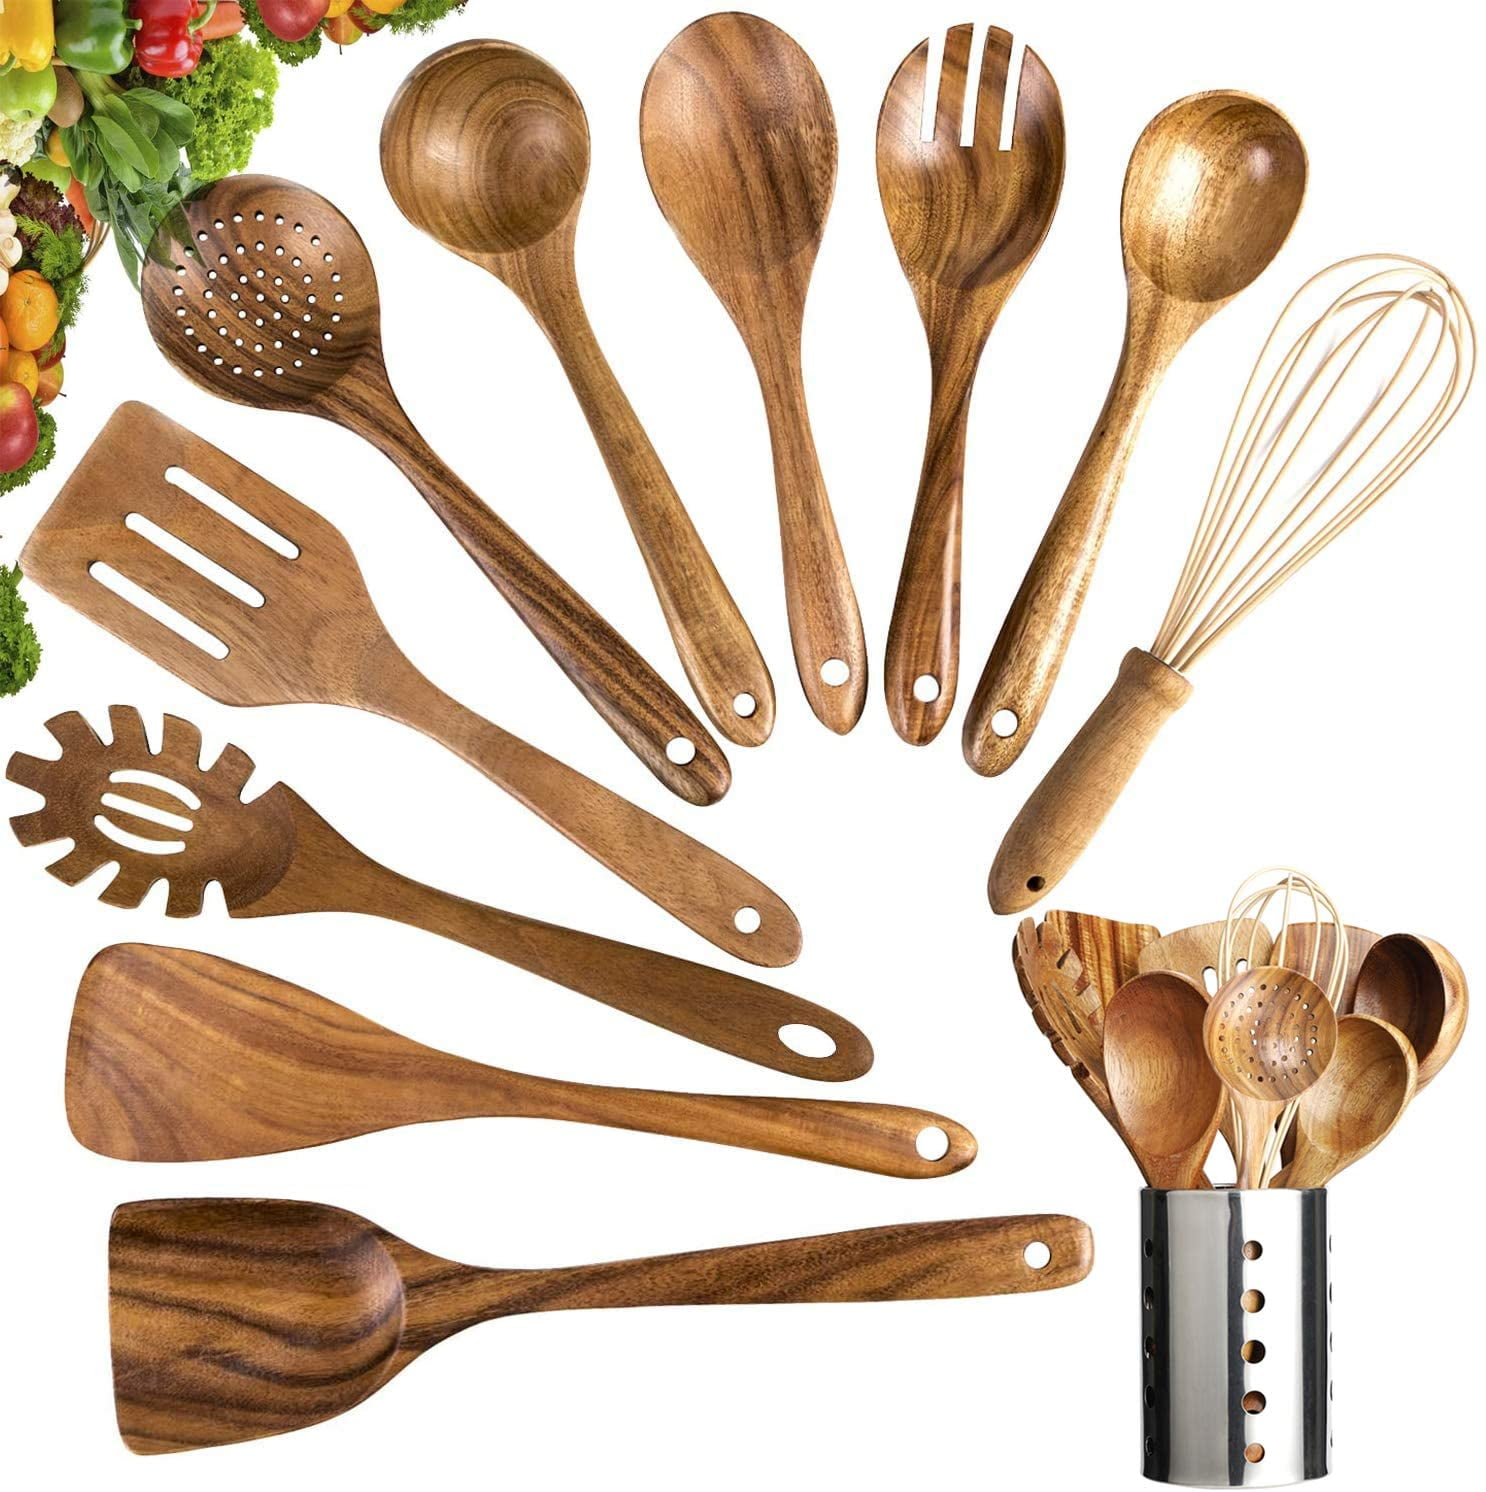 Bestomrogh 8-Piece Wooden Cooking Utensil Set Brown Three-Wire Spatula Colander Storage Non-Stick Barrel Cookware Kitchen Accessories Suitable for Cooking Natural Healthy Wooden Spoon 